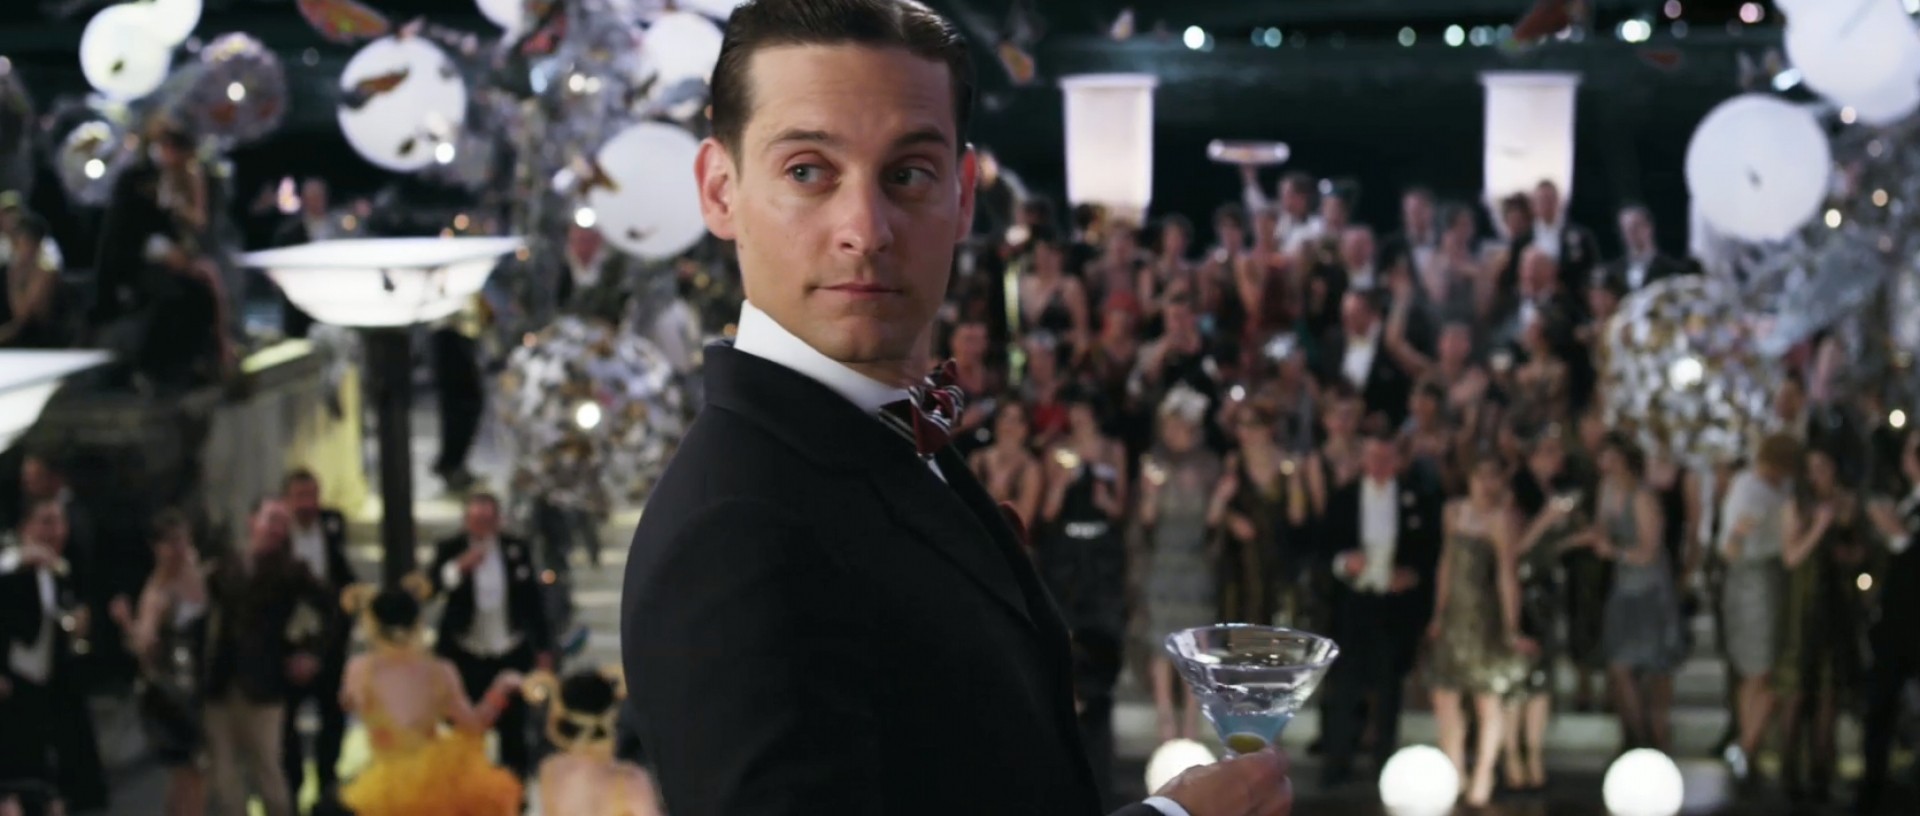 Quelle: http://www.blunderbussmag.com/wp-content/uploads/2013/05/tobey-maguire-as-nick-carraway-in-the-great.jpg